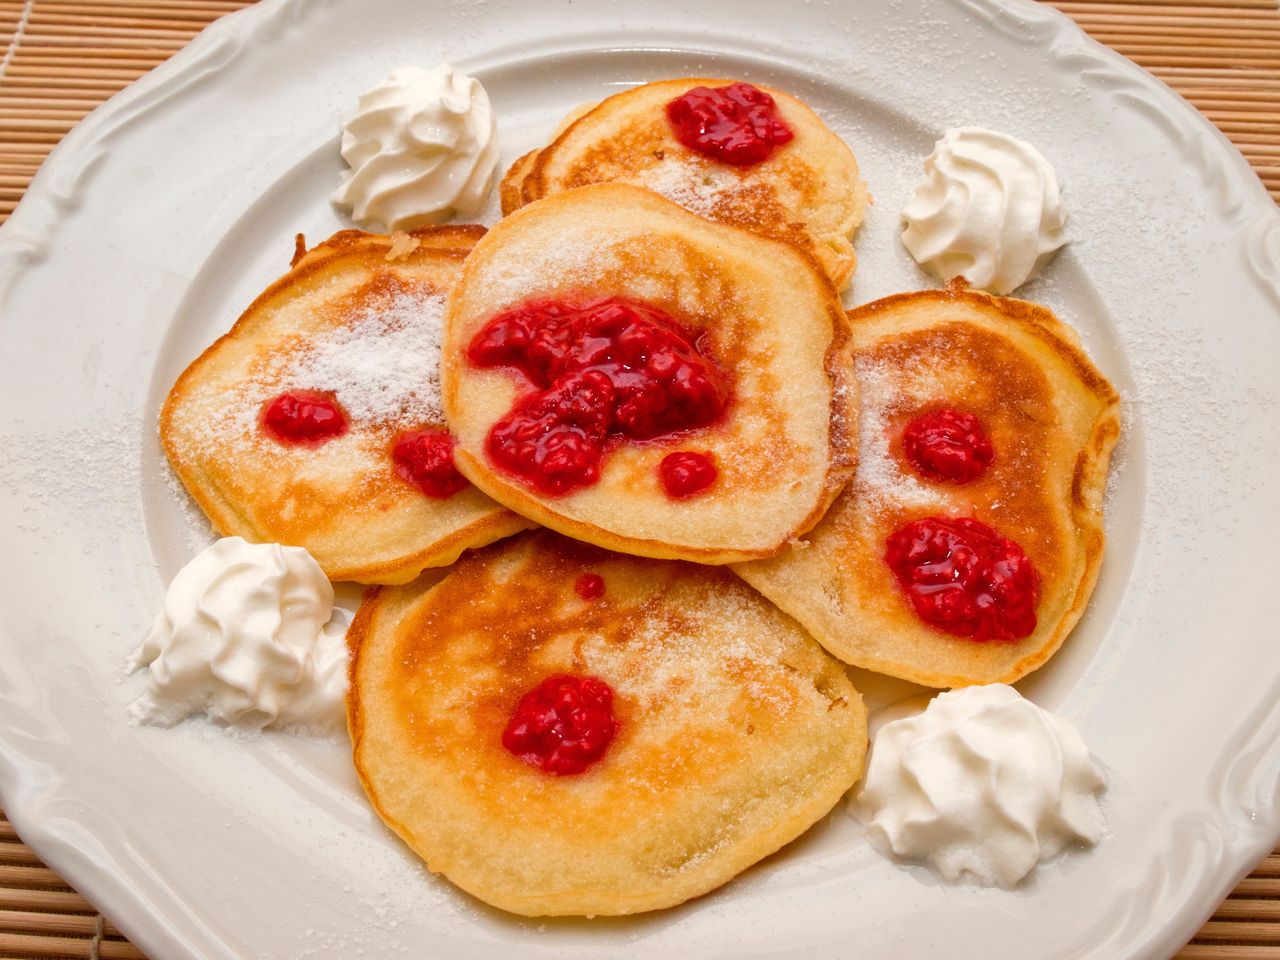 Pancakes and cheese: A delightful twist on a classic breakfast